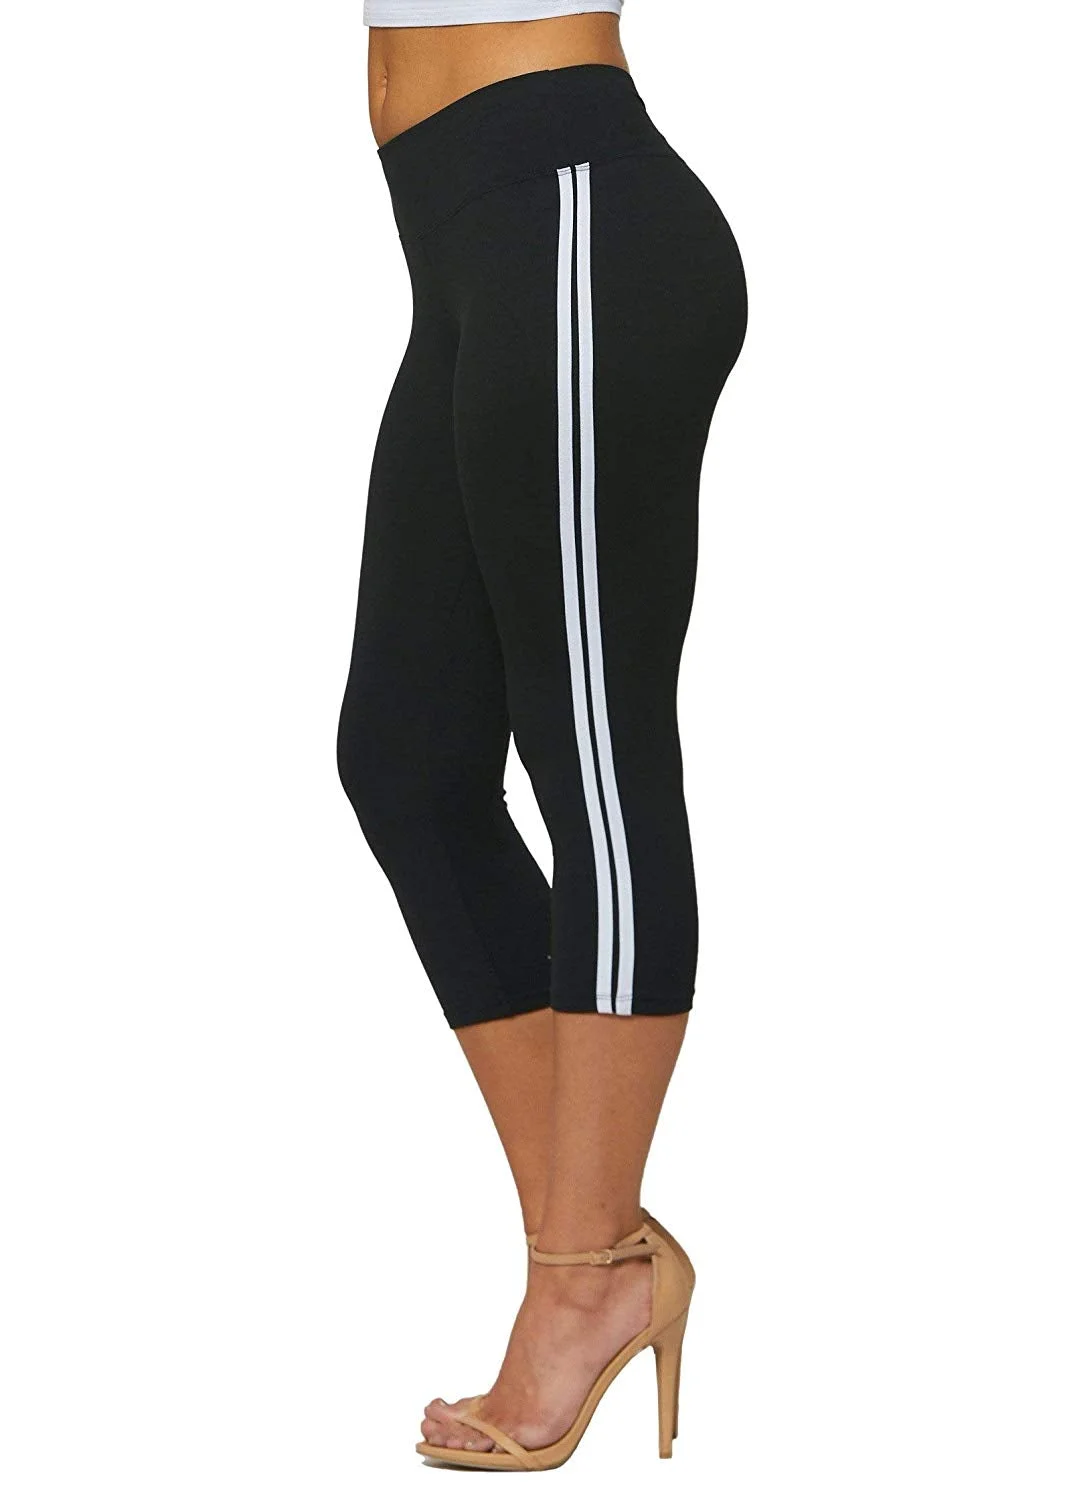 High Waisted Leggings - 20+ Colors in Capri and Full Length - Regular and Plus Size